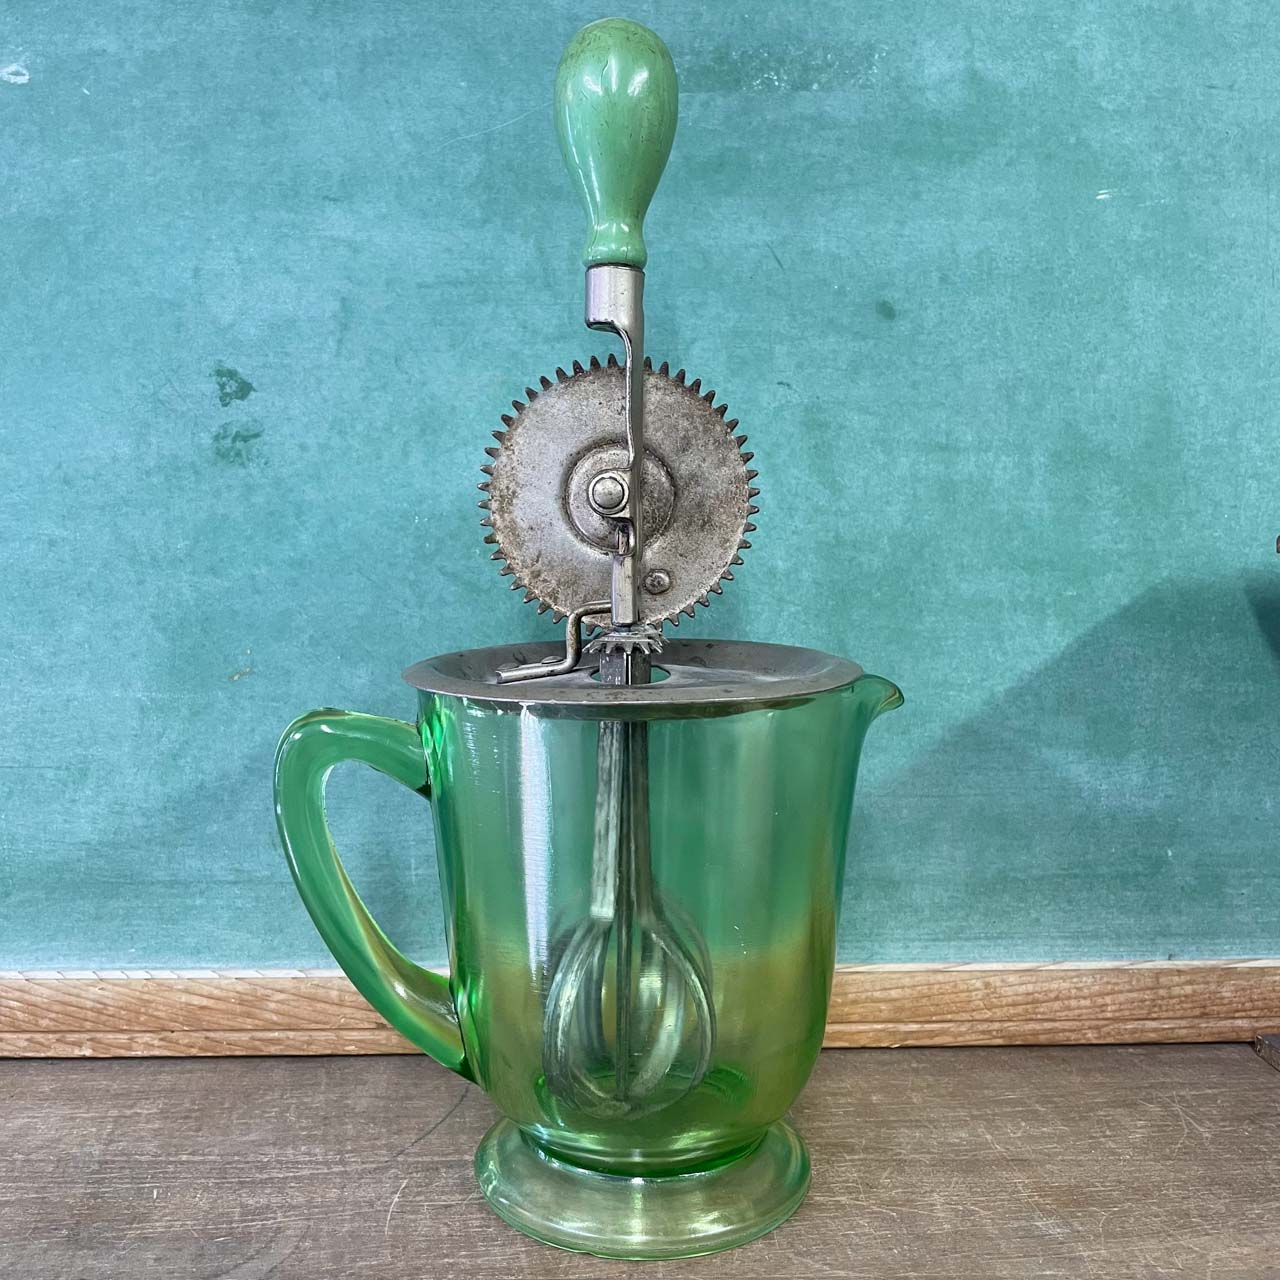 https://thejunkparlor.com/wp-content/uploads/2022/03/green-glass-4-cup-hand-mixer-beater-kitchen-vintage-4.jpeg